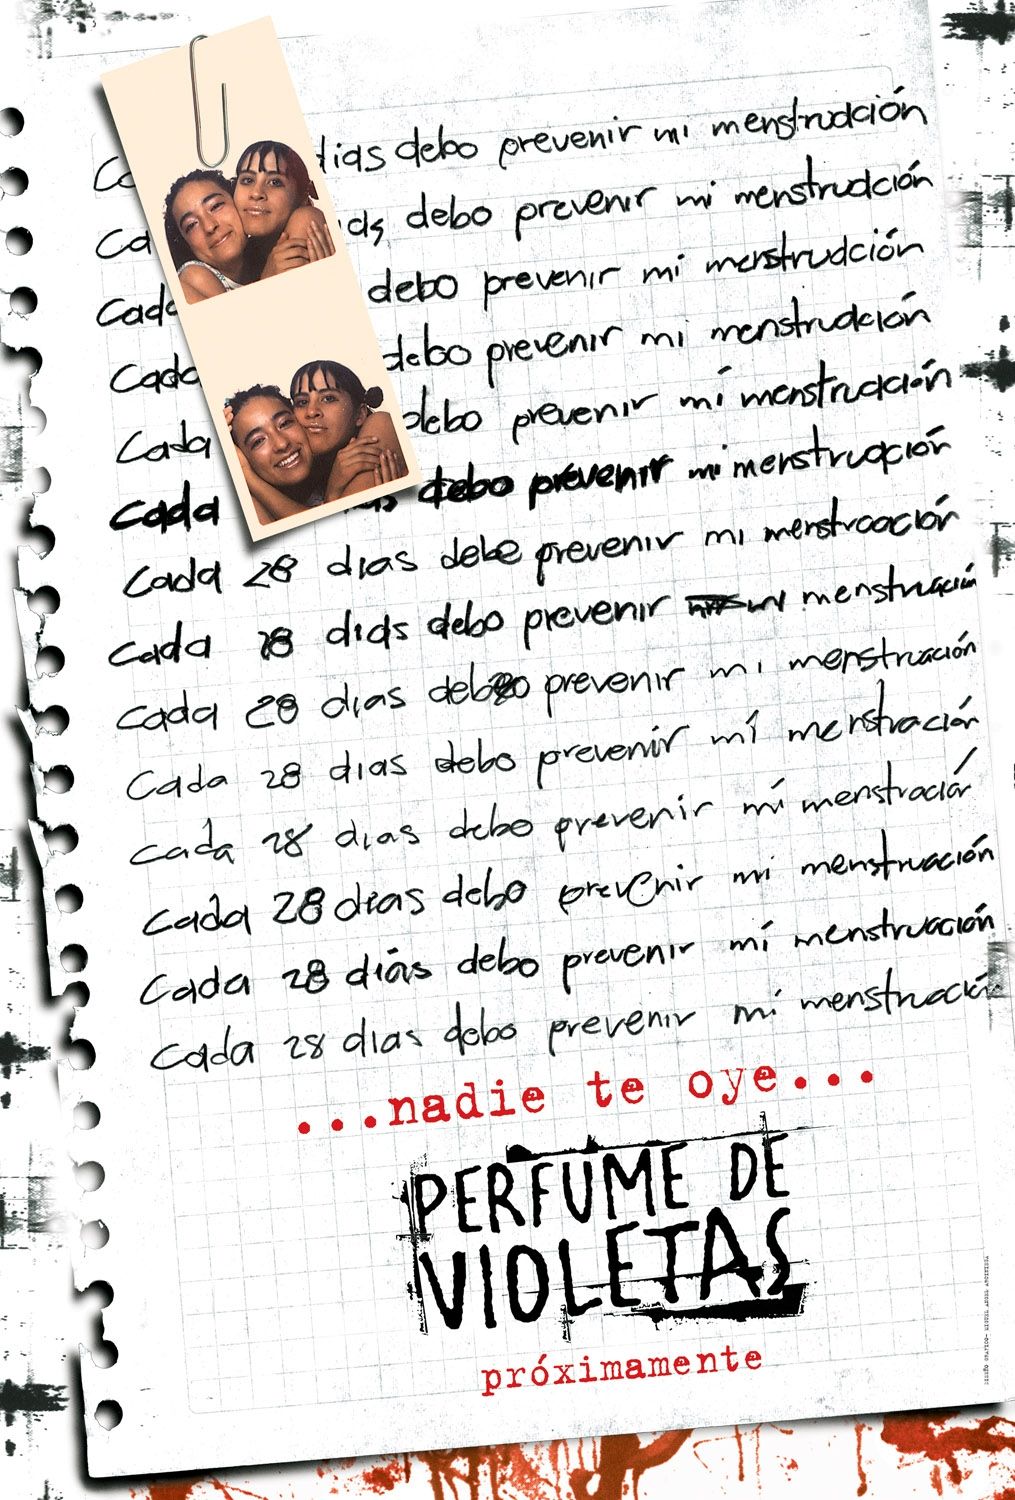 Extra Large Movie Poster Image for Perfume de violetas (#1 of 2)